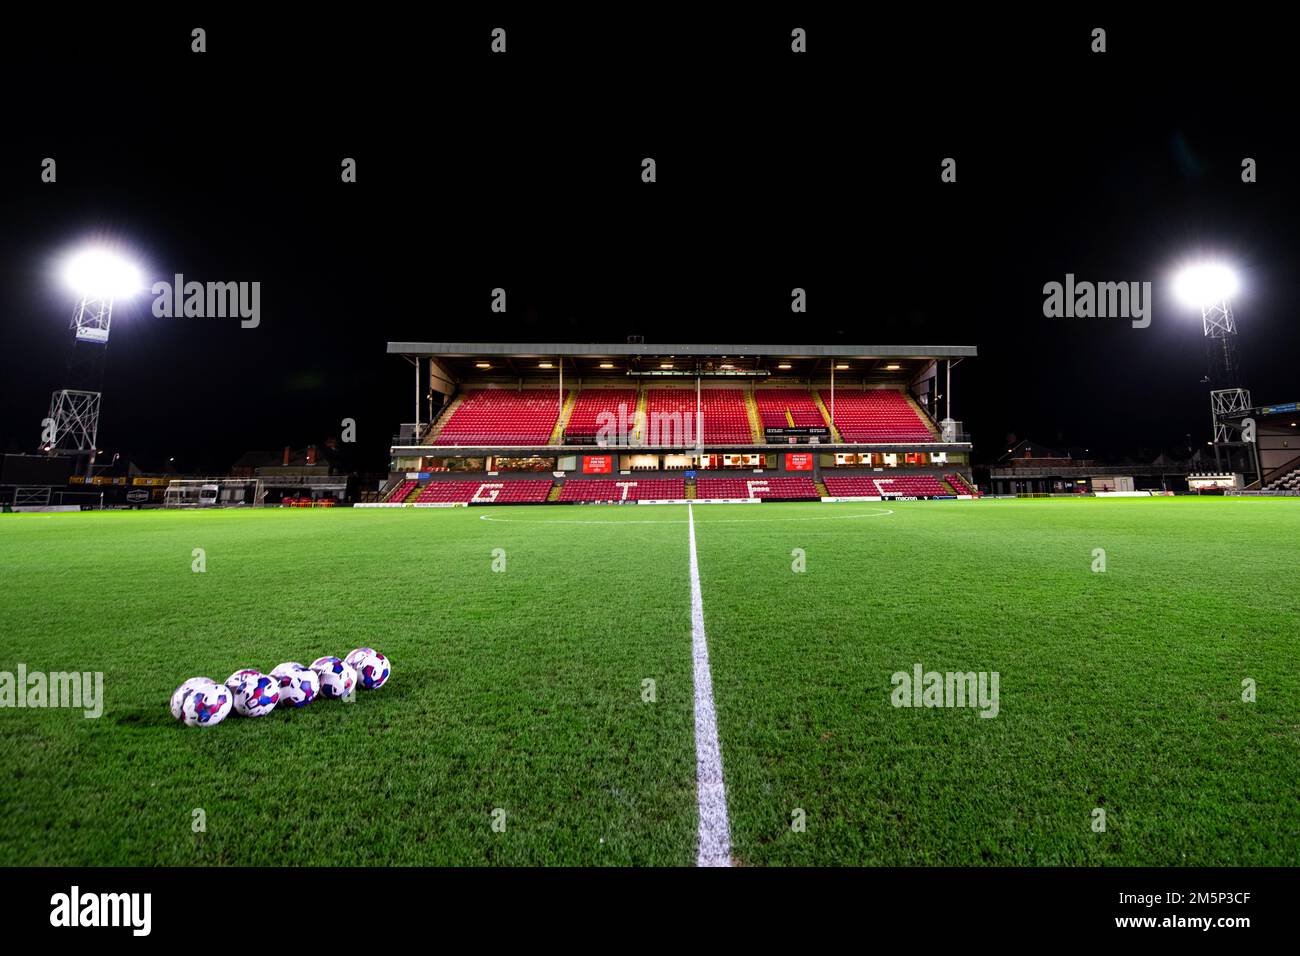 Blundell Park, Grimsby Town Football Club. Stock Photo